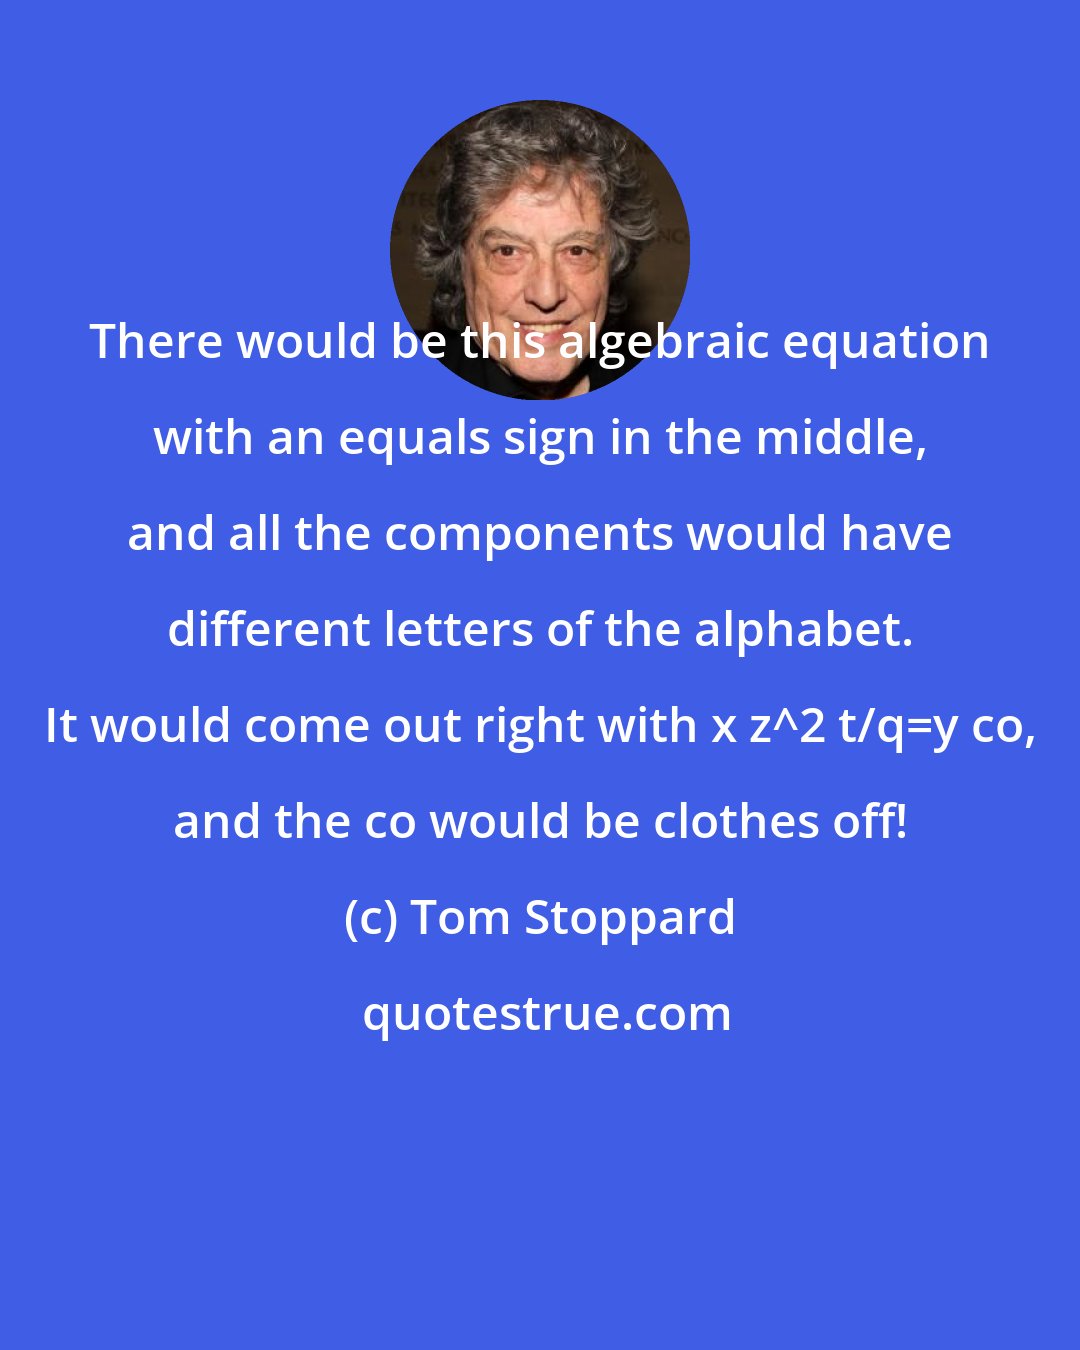 Tom Stoppard: There would be this algebraic equation with an equals sign in the middle, and all the components would have different letters of the alphabet. It would come out right with x+z^2+t/q=y+co, and the co would be clothes off!